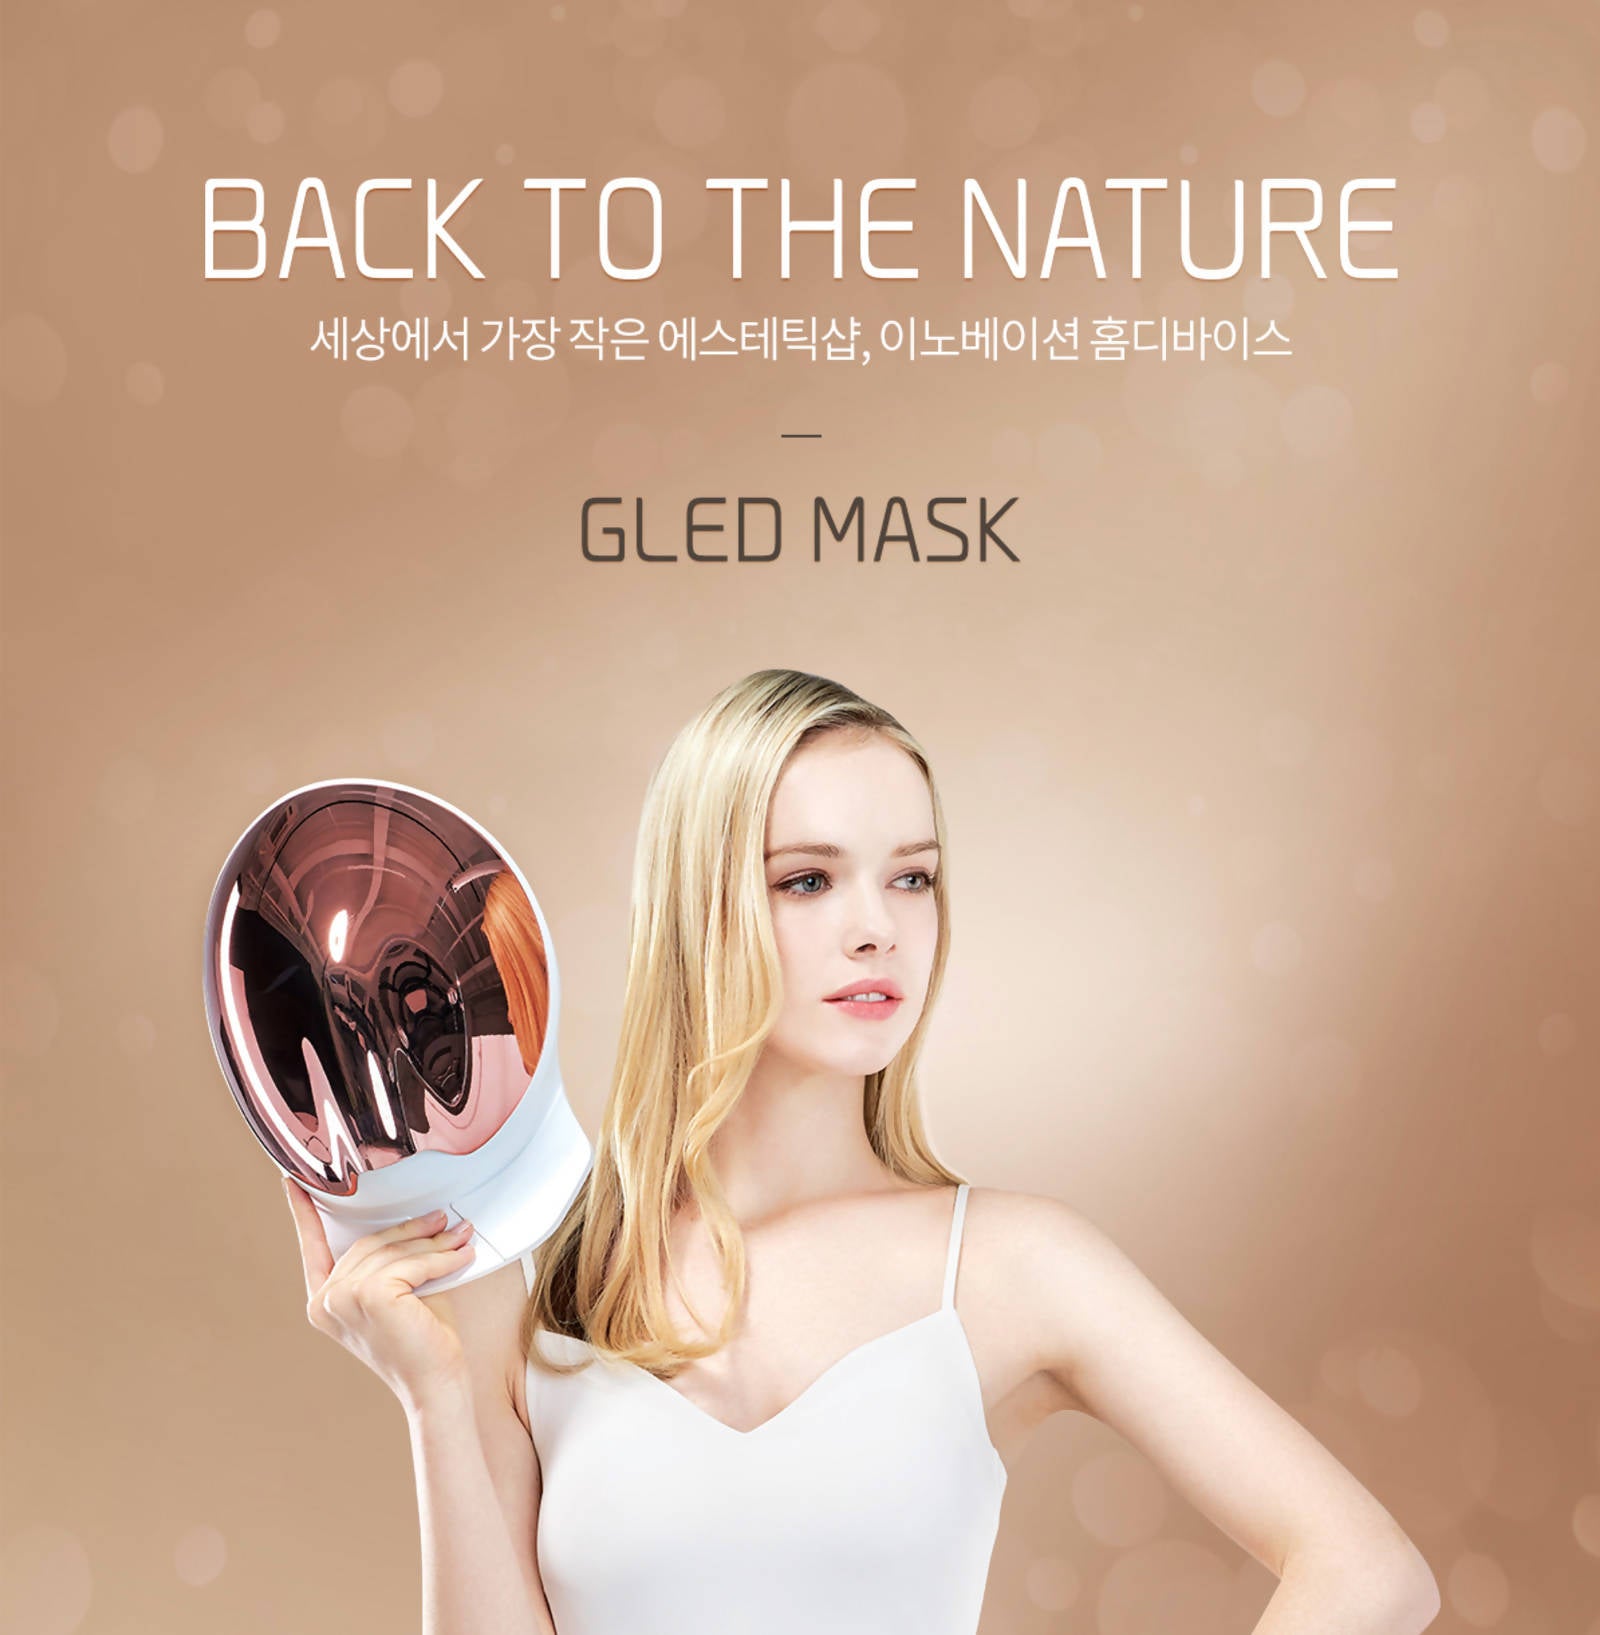 G-LED Mask #Only 15 Minutes # Easy Beauty Homecare